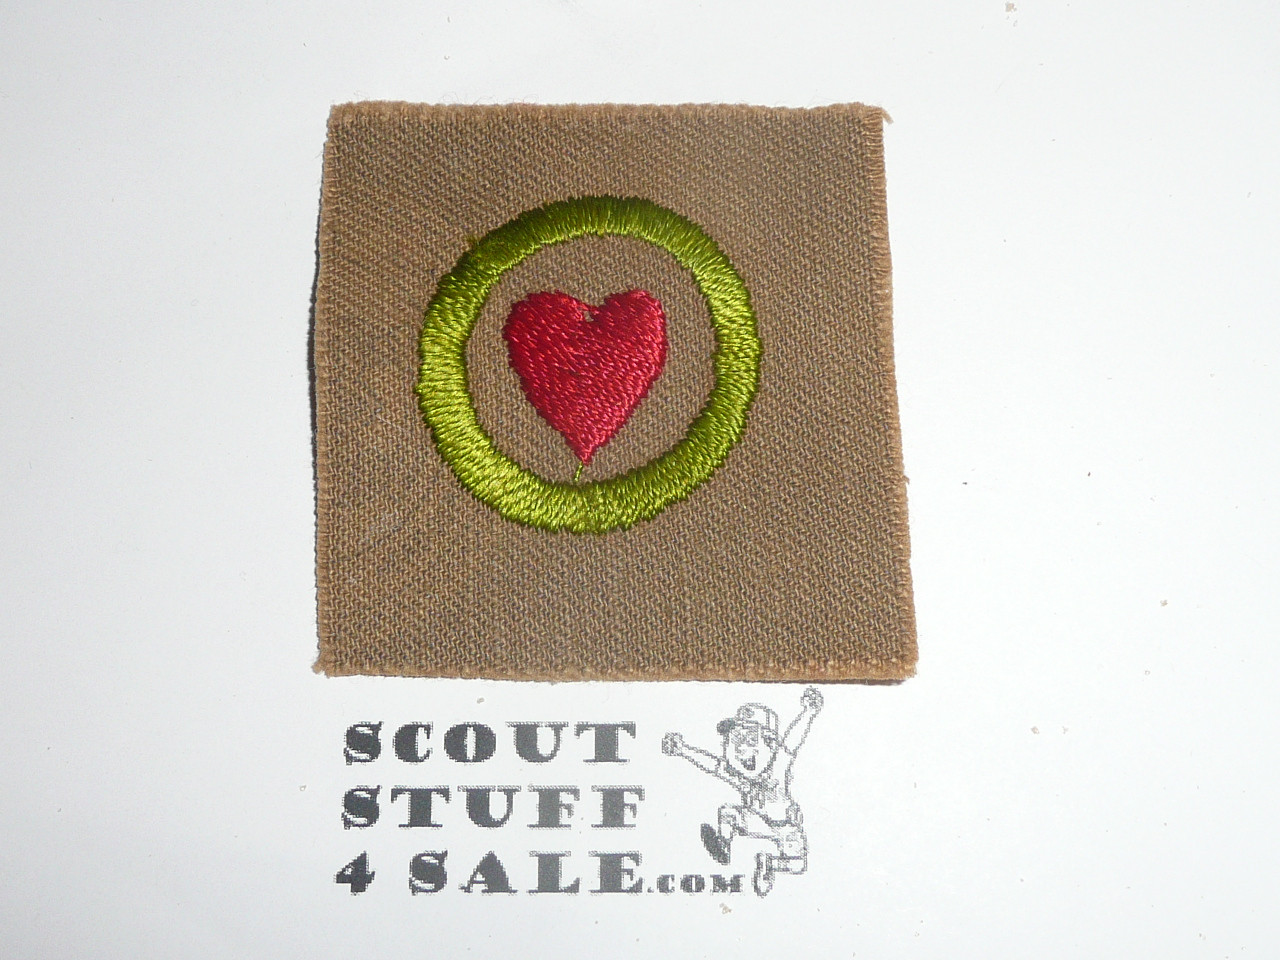 Personal Health - Type A - Square Tan Merit Badge (1911-1933), black striped back with emblem